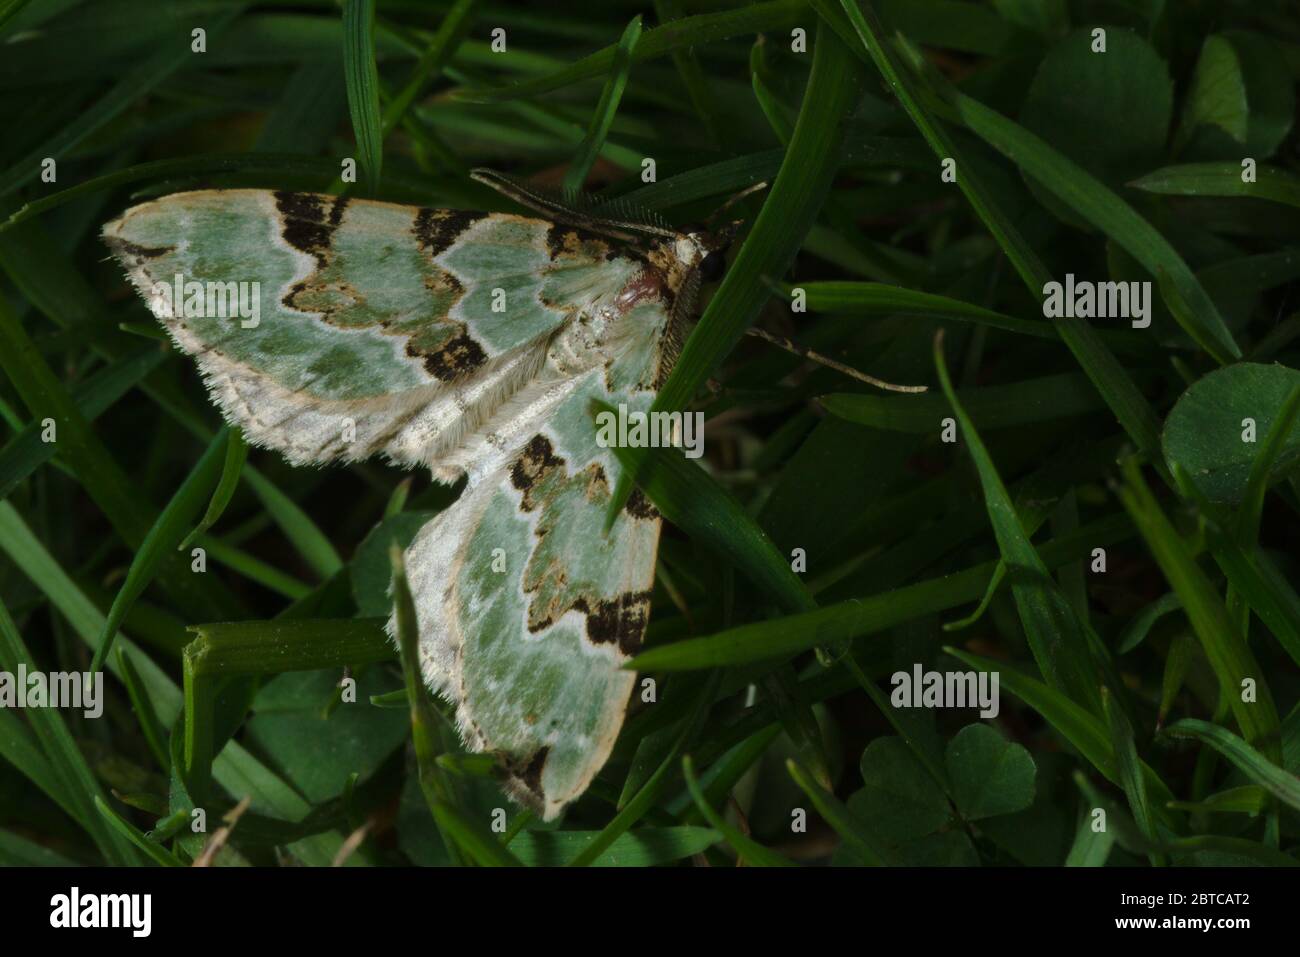 A green carpet moth is camouflaged amongst deep green grass in this macro photo. Stock Photo